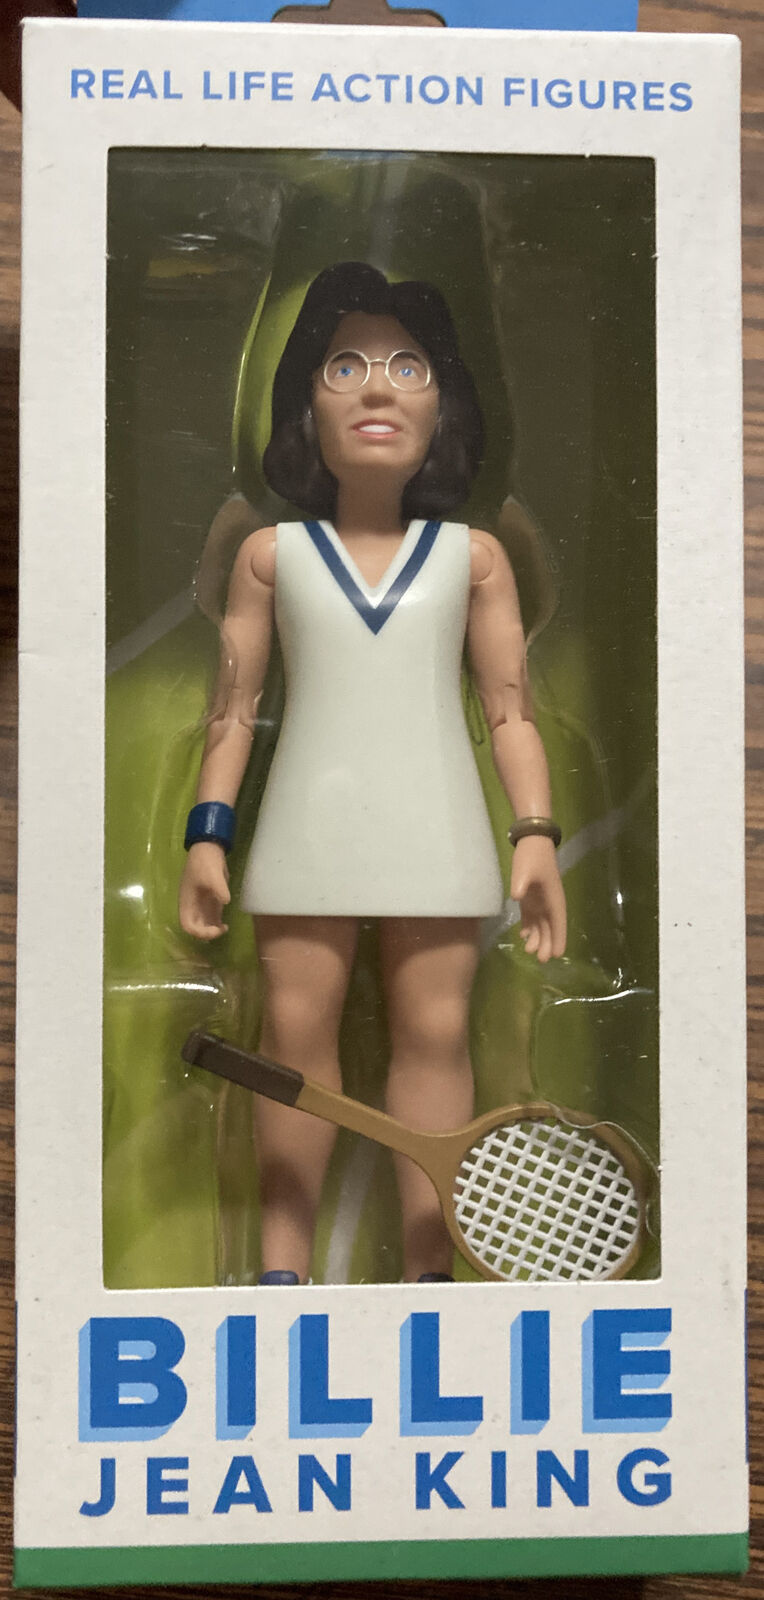 Billie Jean King Real Life Action Figures World Tennis Champion 2019 Fctry for sale online